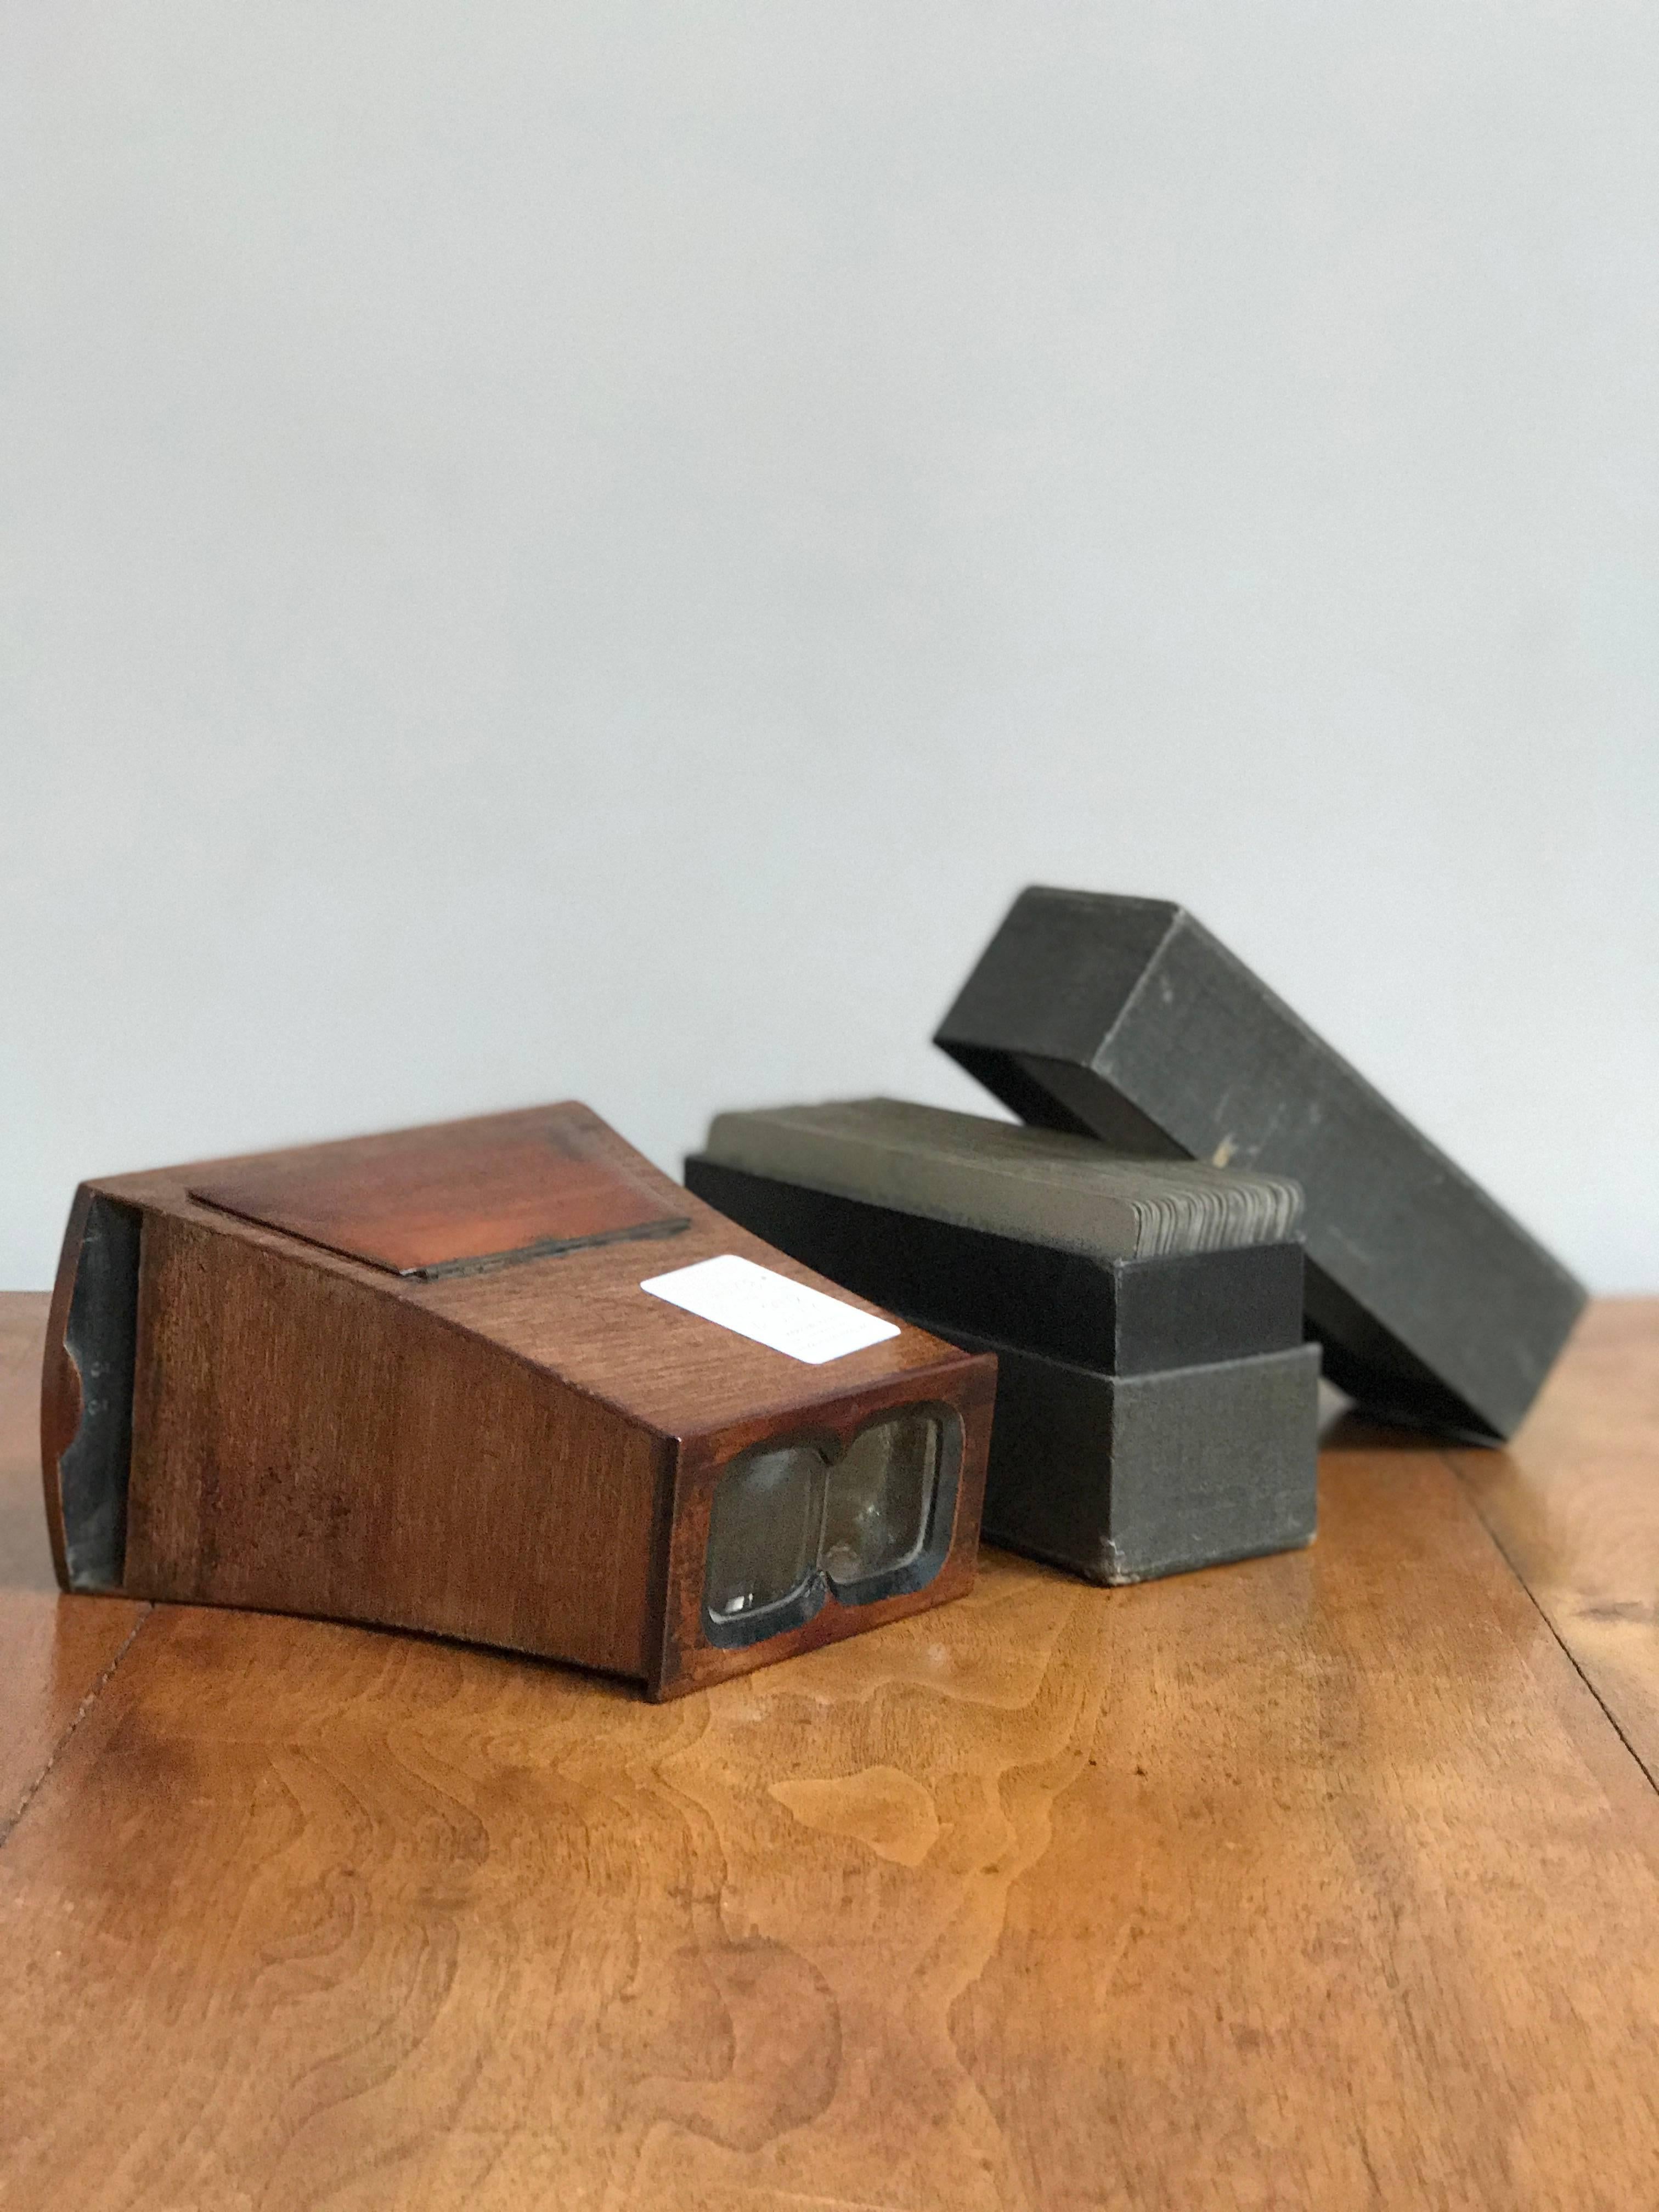 English Vintage Wood Stereoscope with Sepia Toned Cards from Late 19th Century England